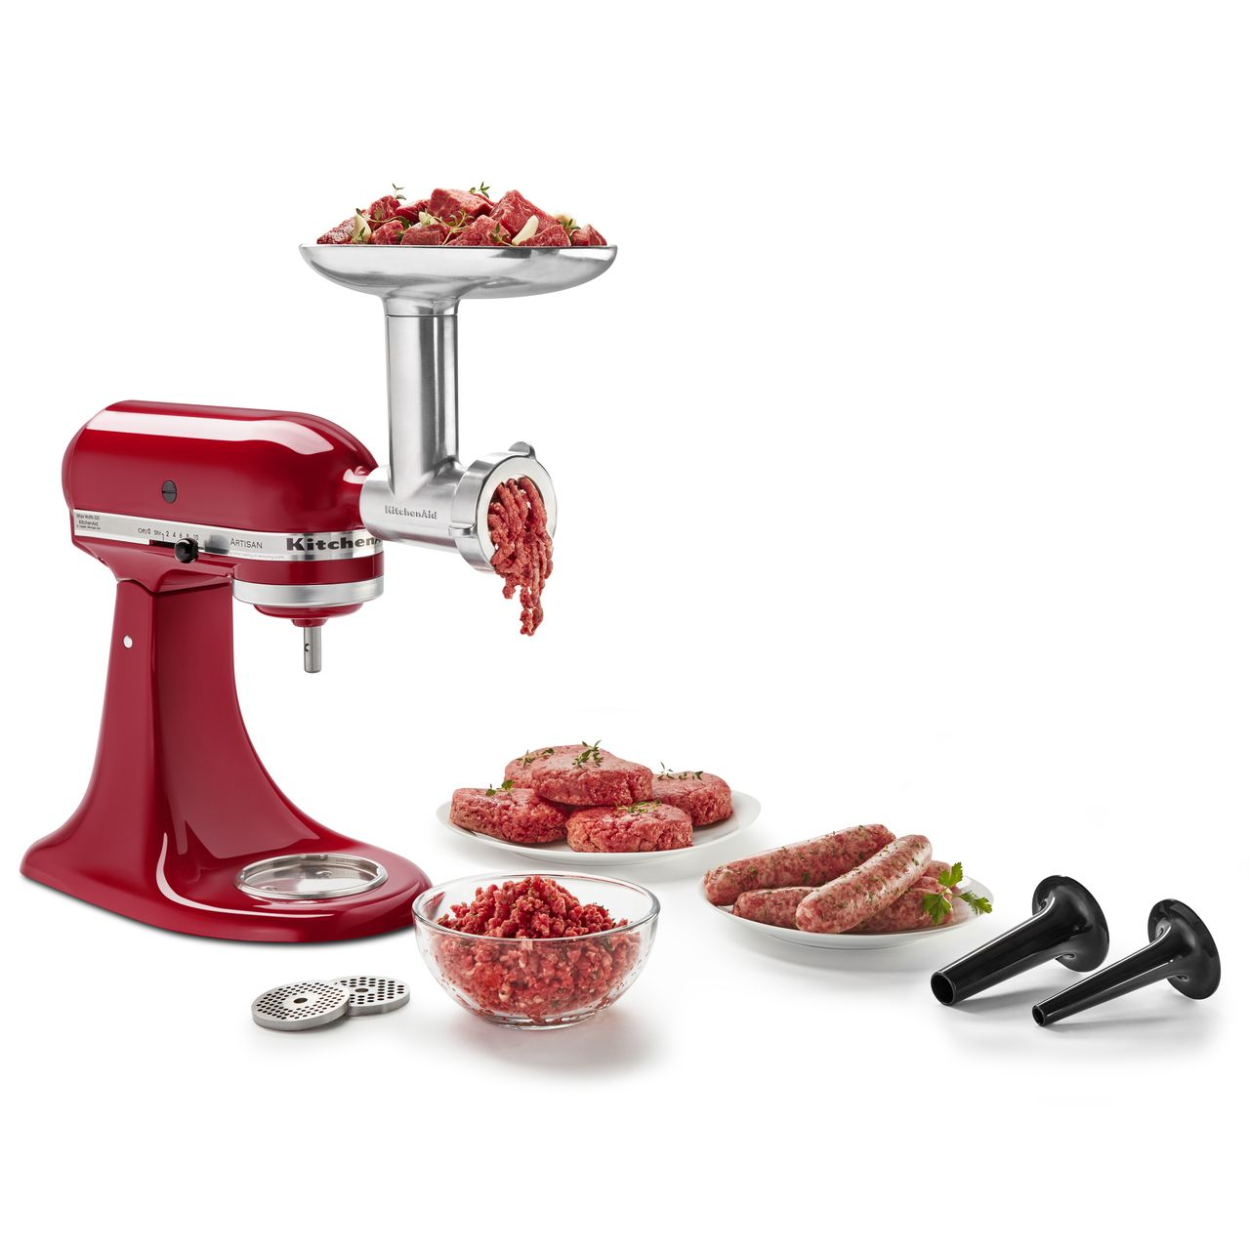 KitchenAid Sifter and Scale Attachment + Reviews